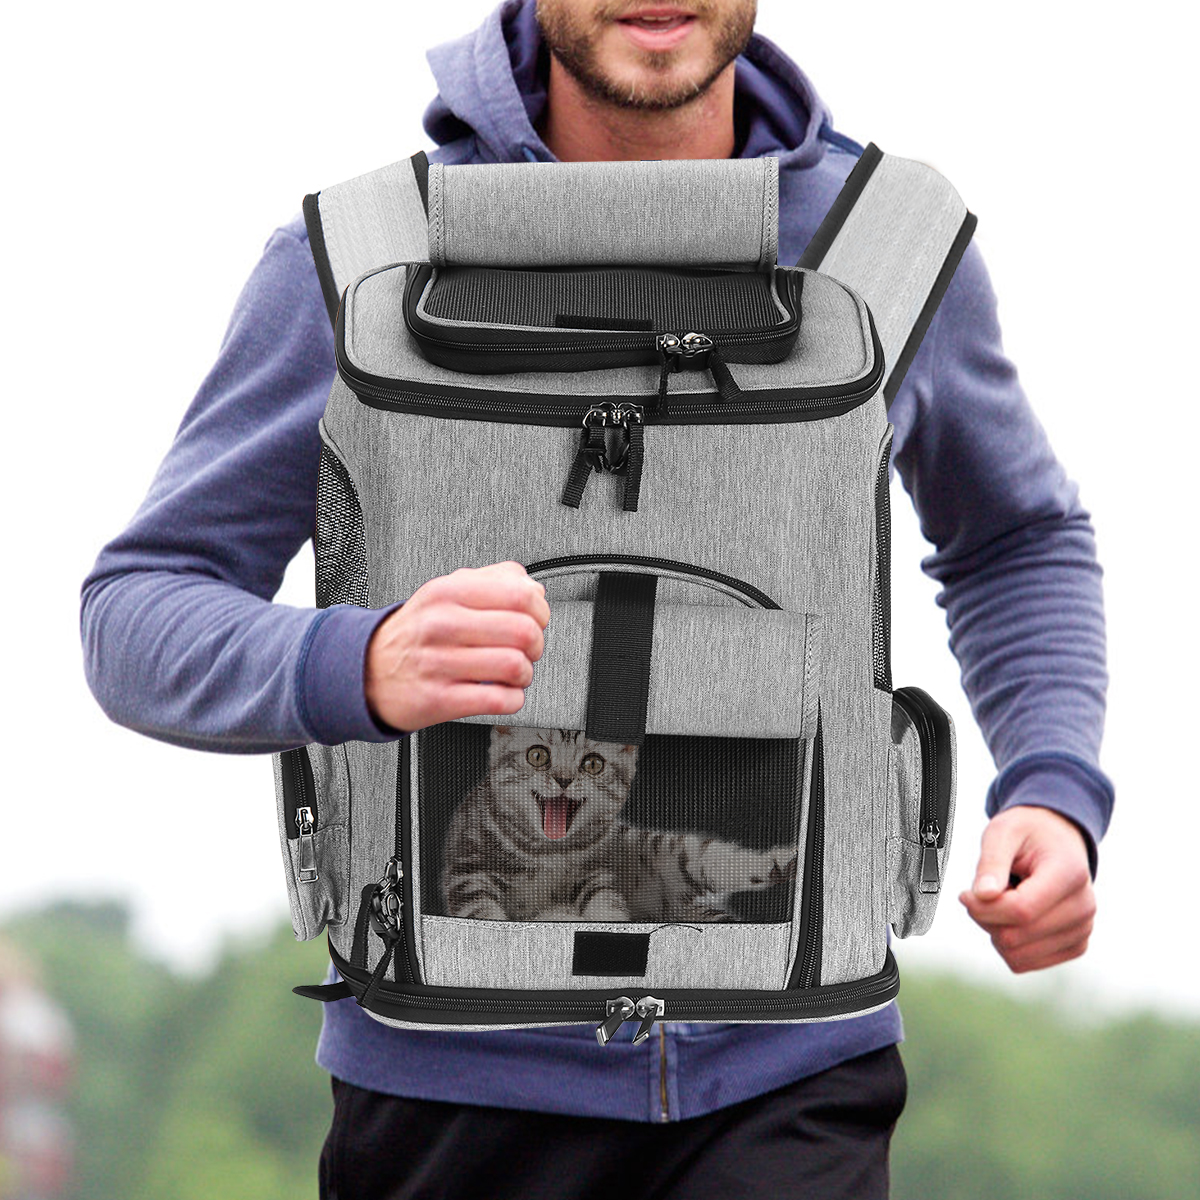 Pet-Carrier-Backpack-Breathable-Puppy-Travel-Space-Shoulder-Bag-Dog-Cat-Outdoor-Double-sided-cushion-1925739-14